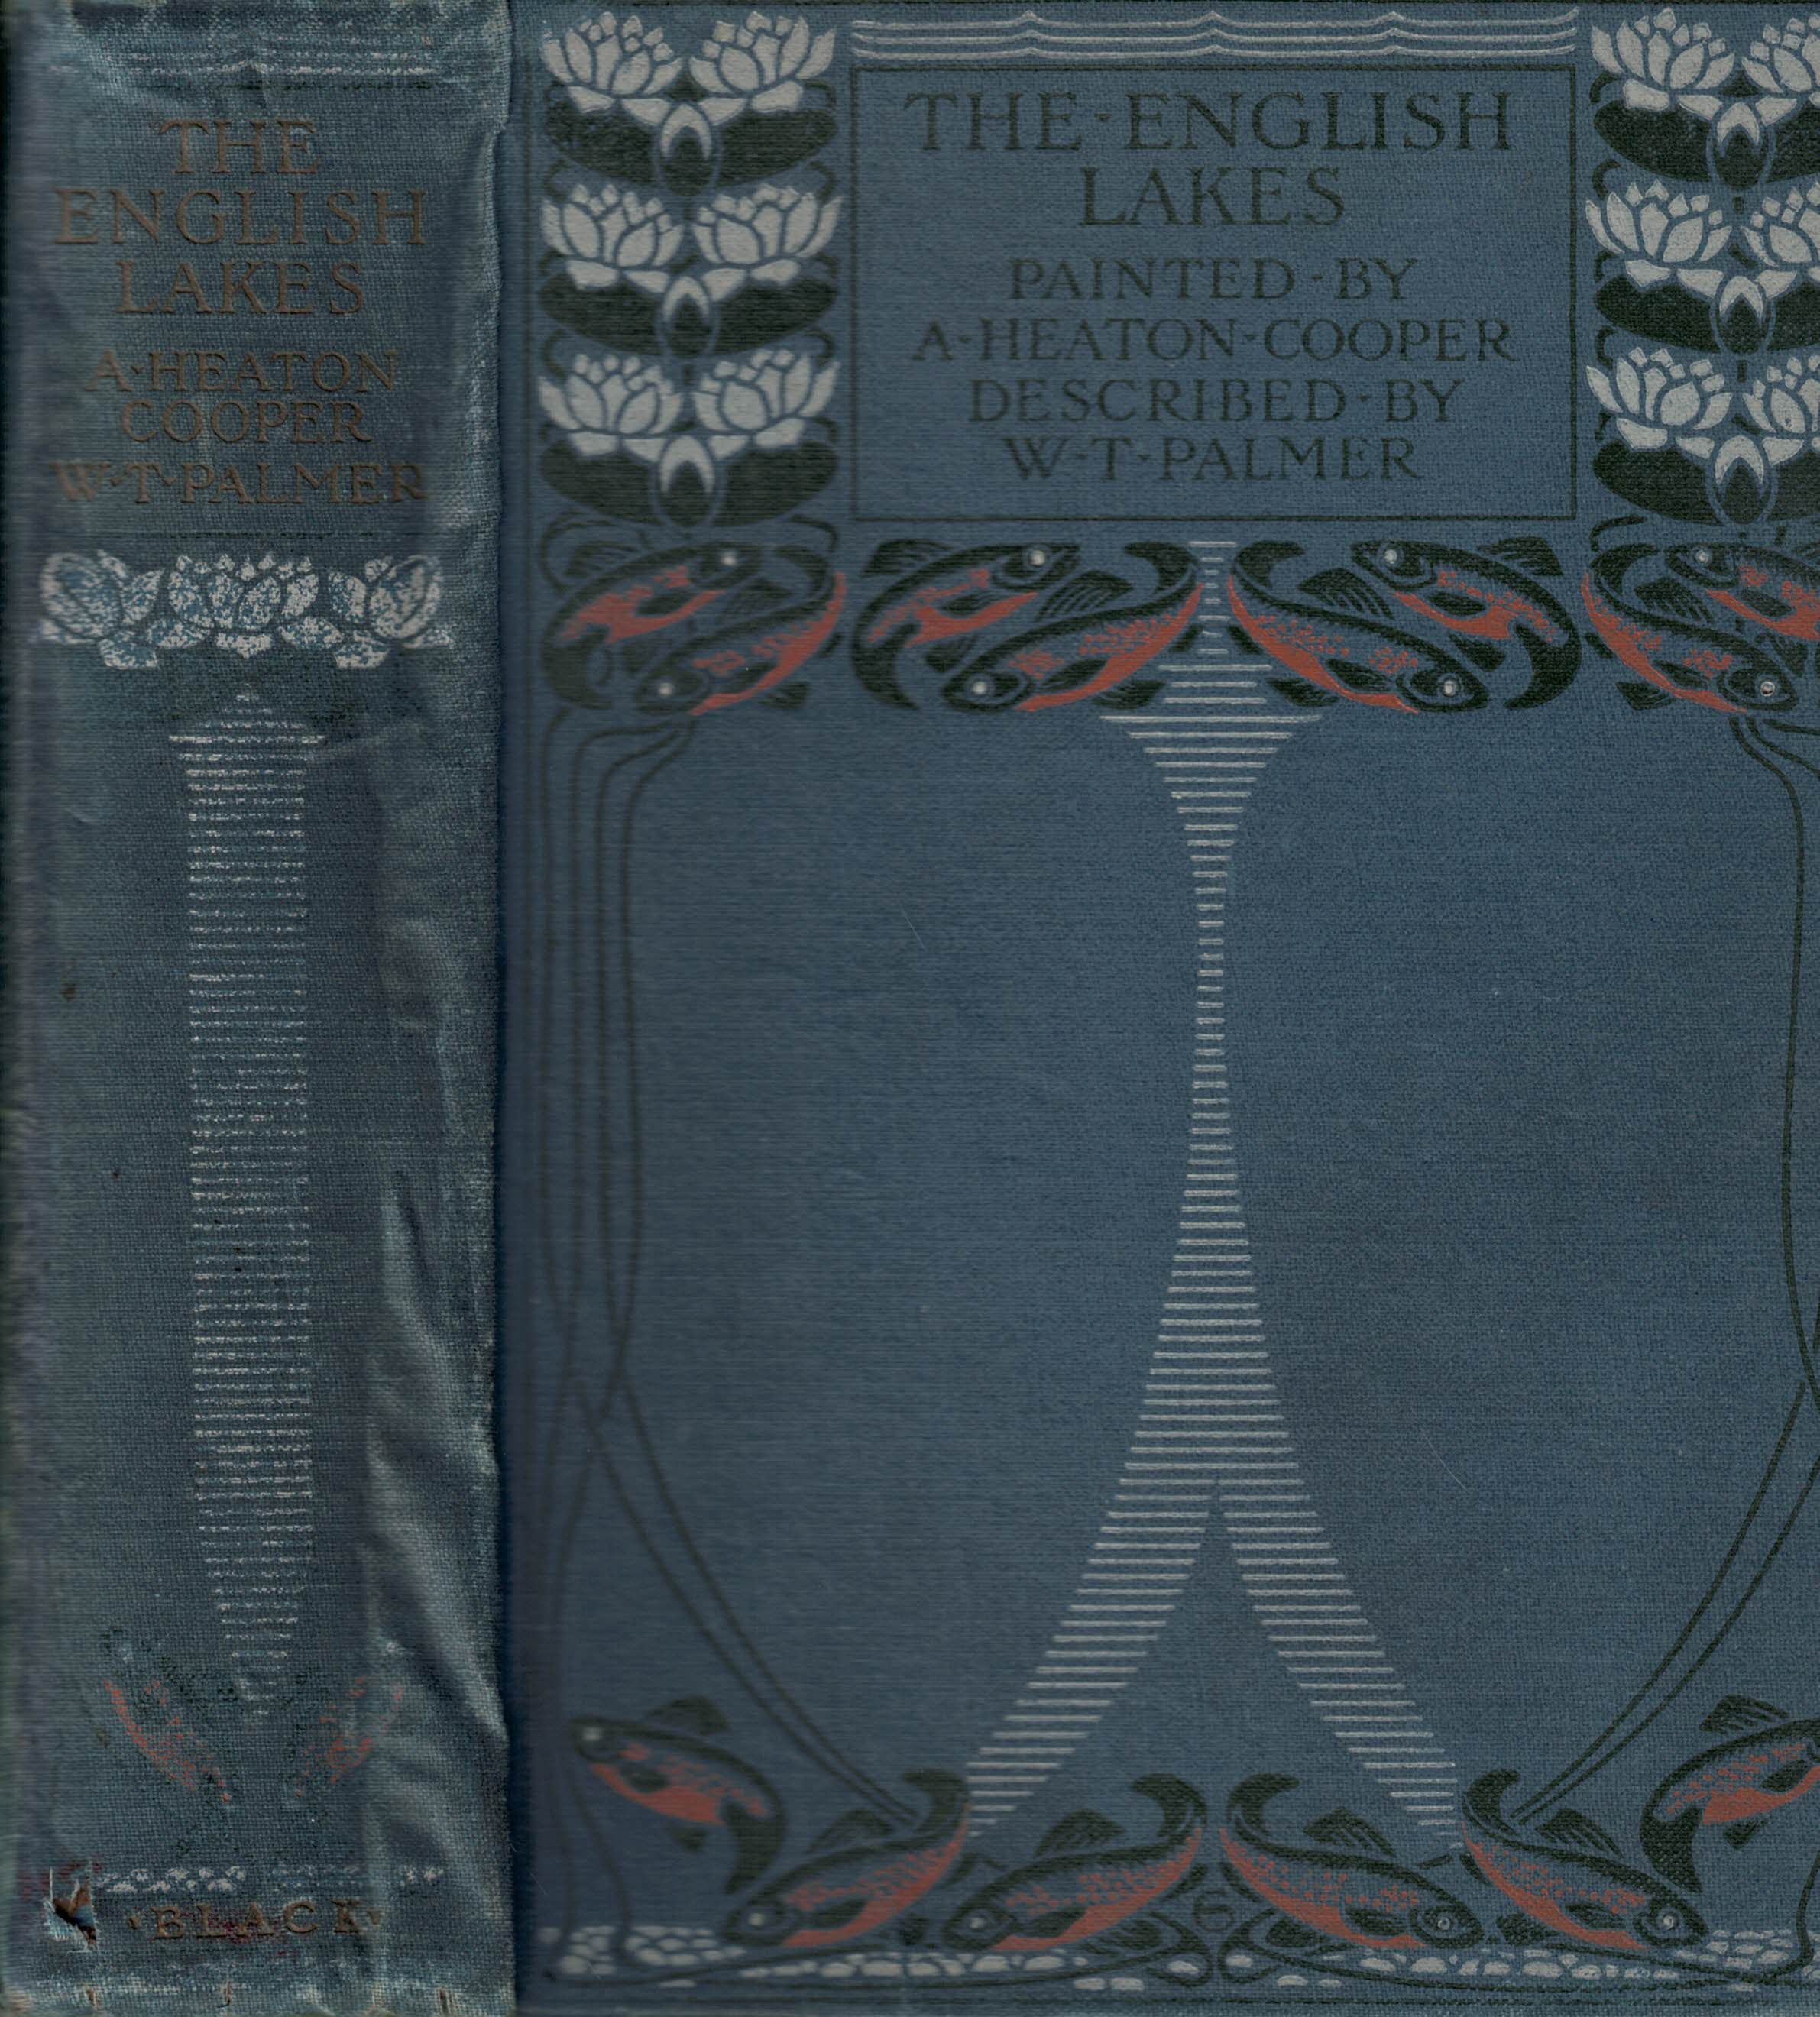 The English Lakes. Painted by A. Heaton Cooper, Described by Wm T. Palmer. 1908.